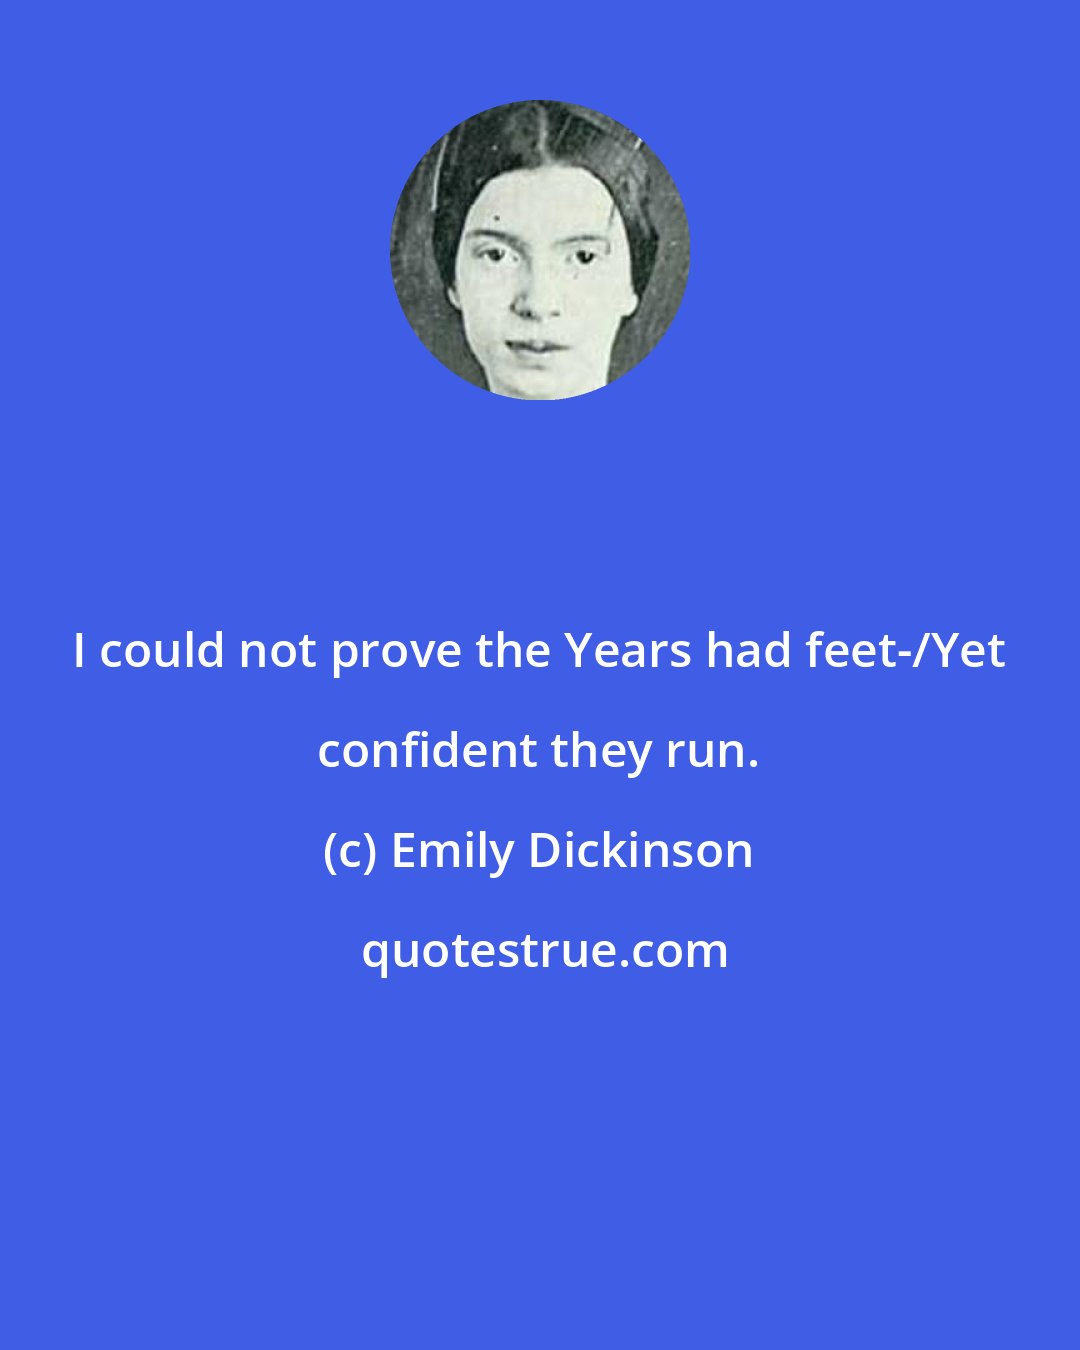 Emily Dickinson: I could not prove the Years had feet-/Yet confident they run.